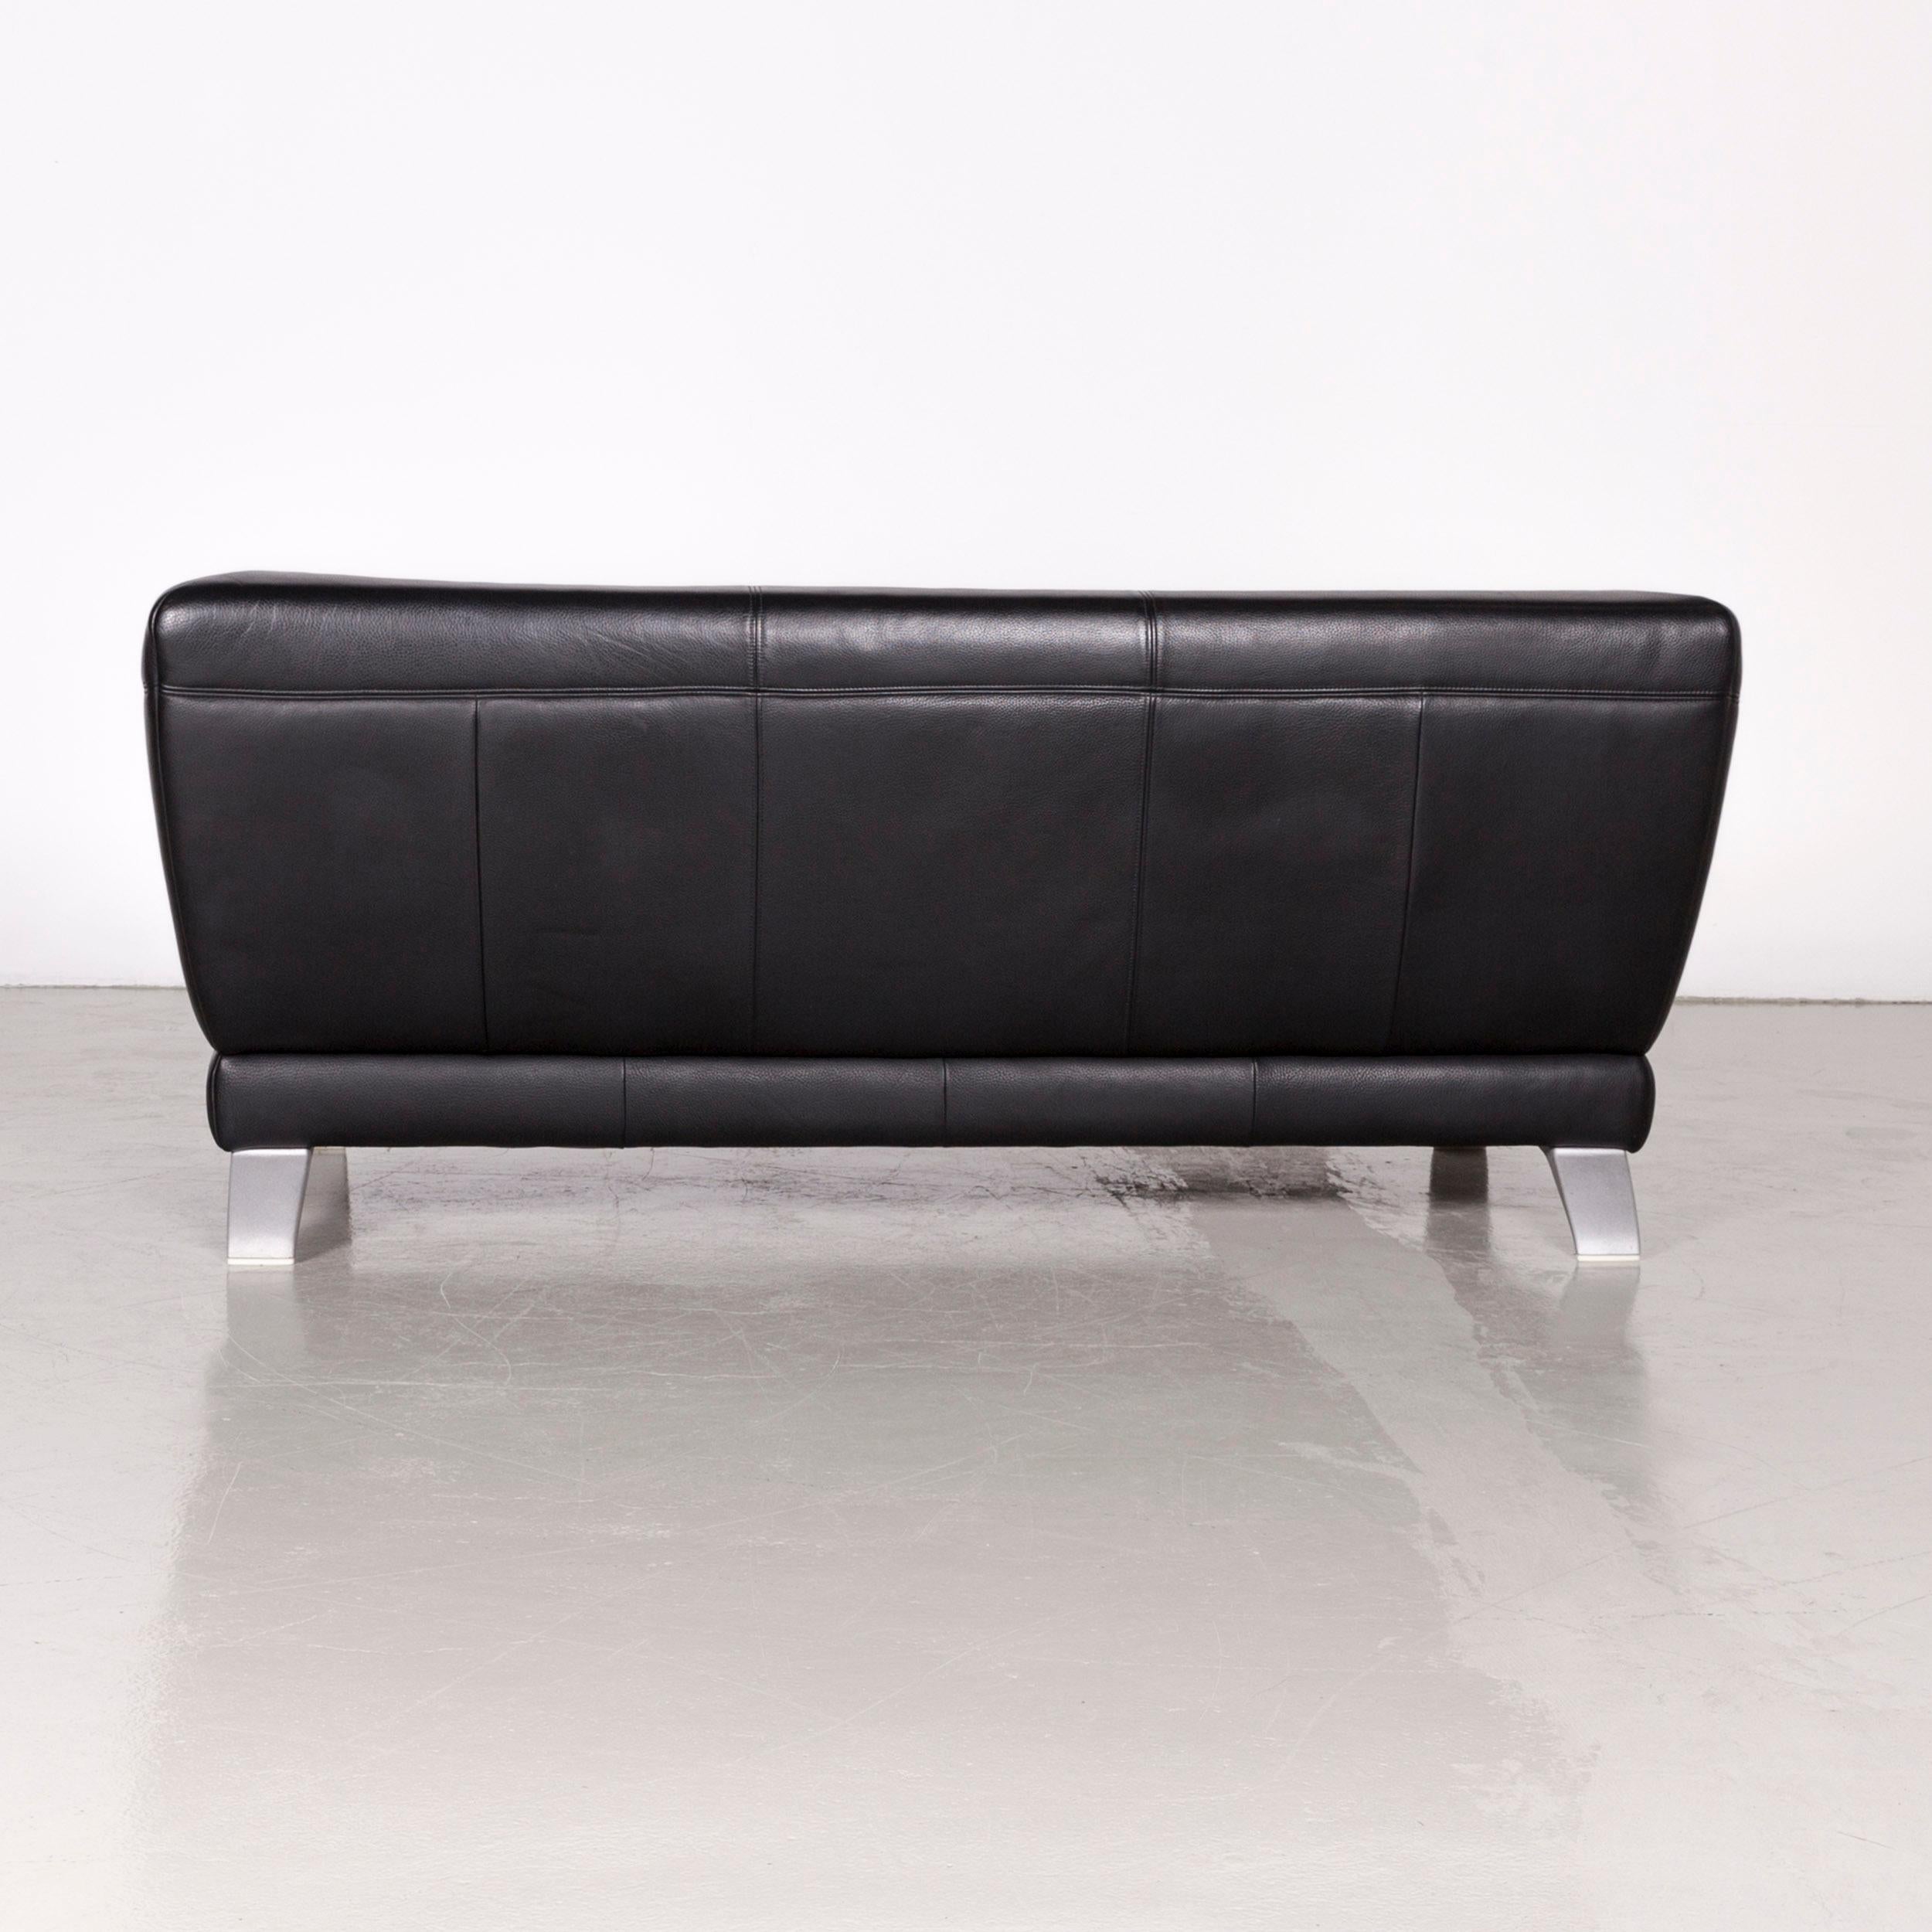 Rolf Benz 2300 Designer Sofa Black Two-Seat Leather Couch 1